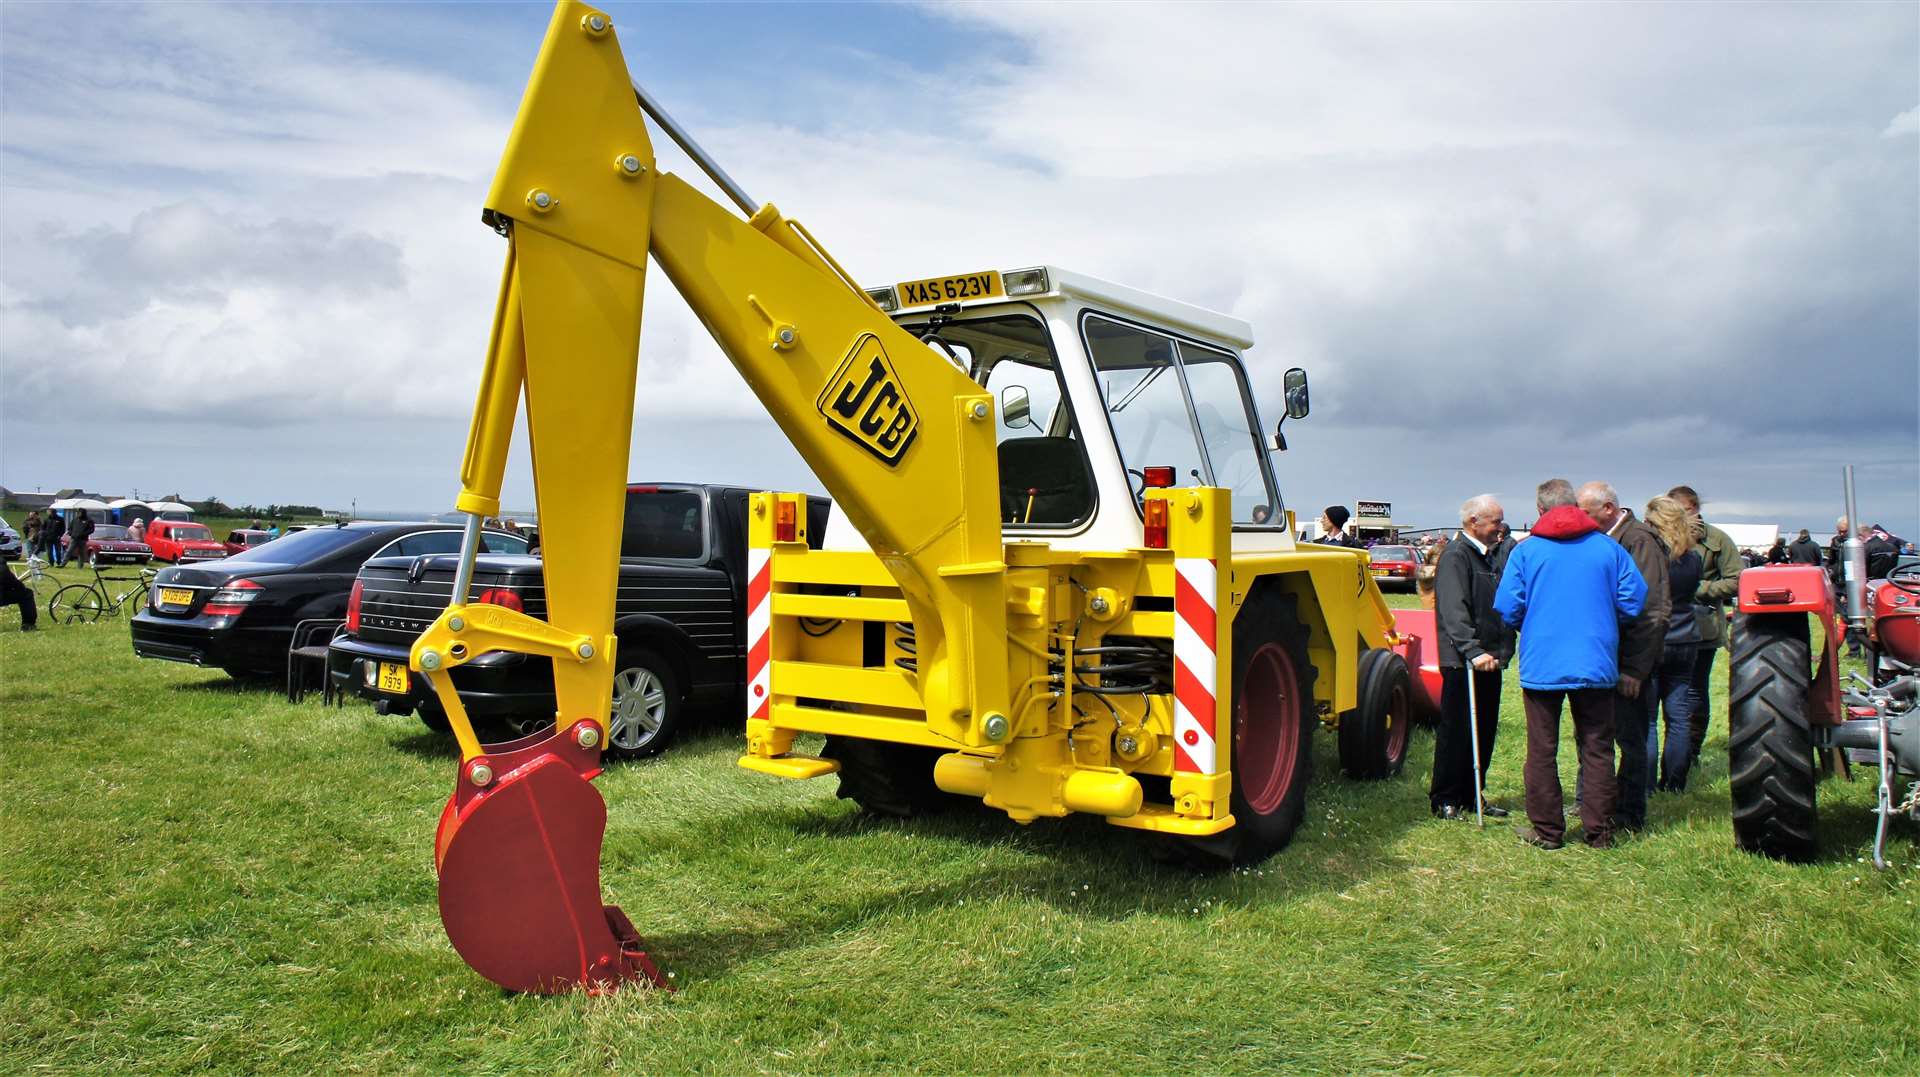 1980 JCB digger 3C entered by Garry Bain from Muir of Ord was voted winner of Class S – Other Vehicles and Machinery. Picture: DGS